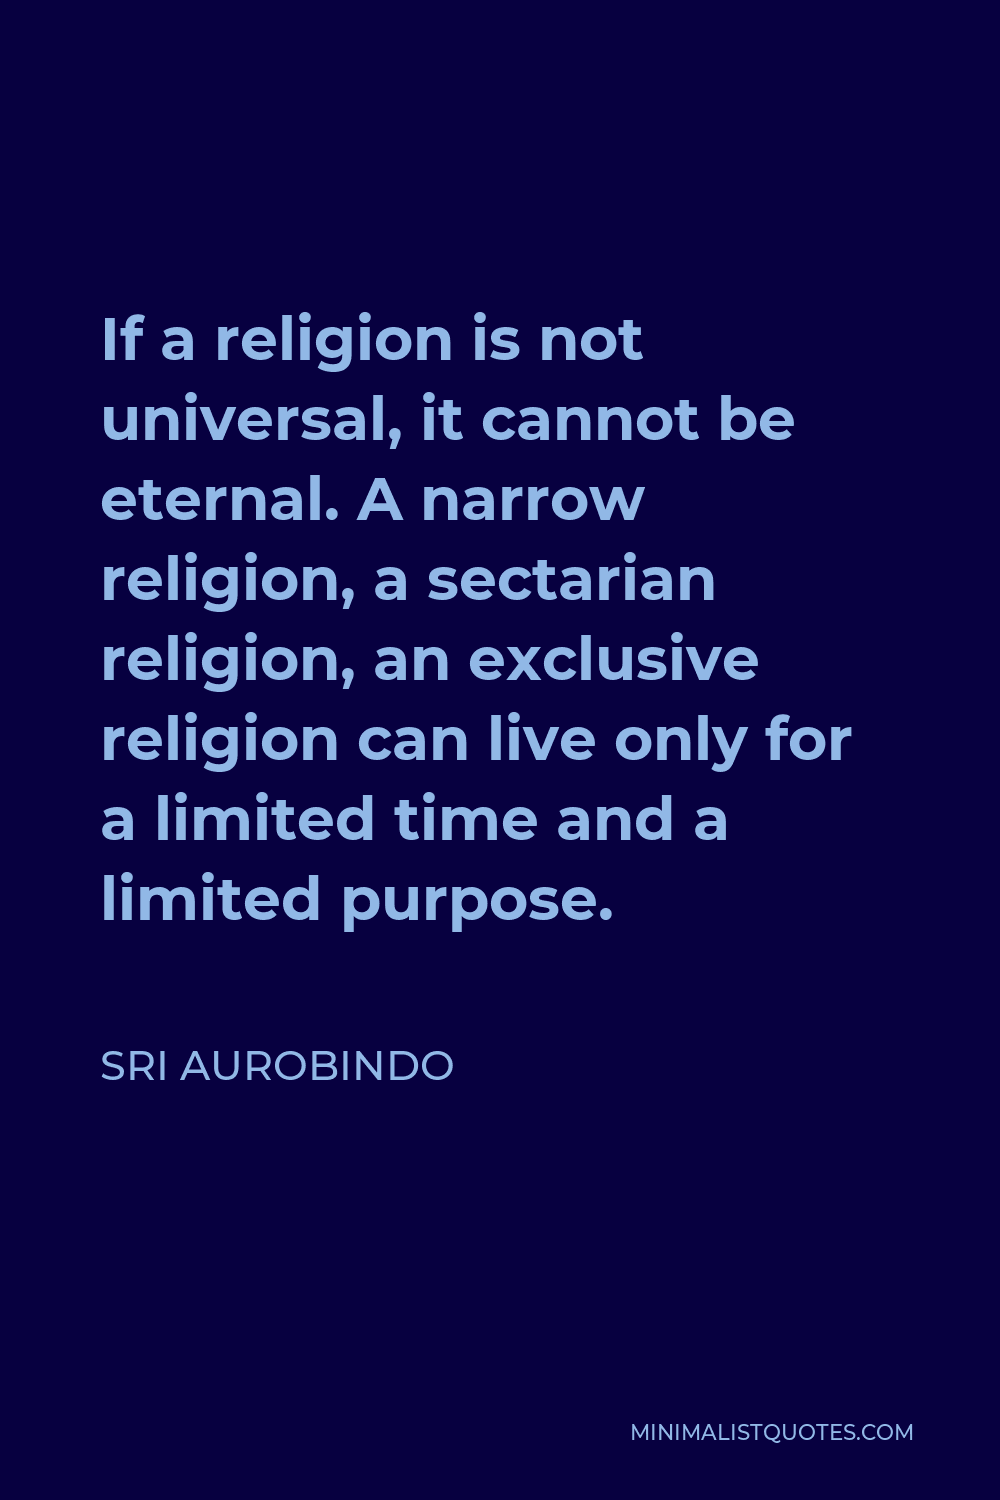 Sri Aurobindo Quote - If a religion is not universal, it cannot be eternal. A narrow religion, a sectarian religion, an exclusive religion can live only for a limited time and a limited purpose.